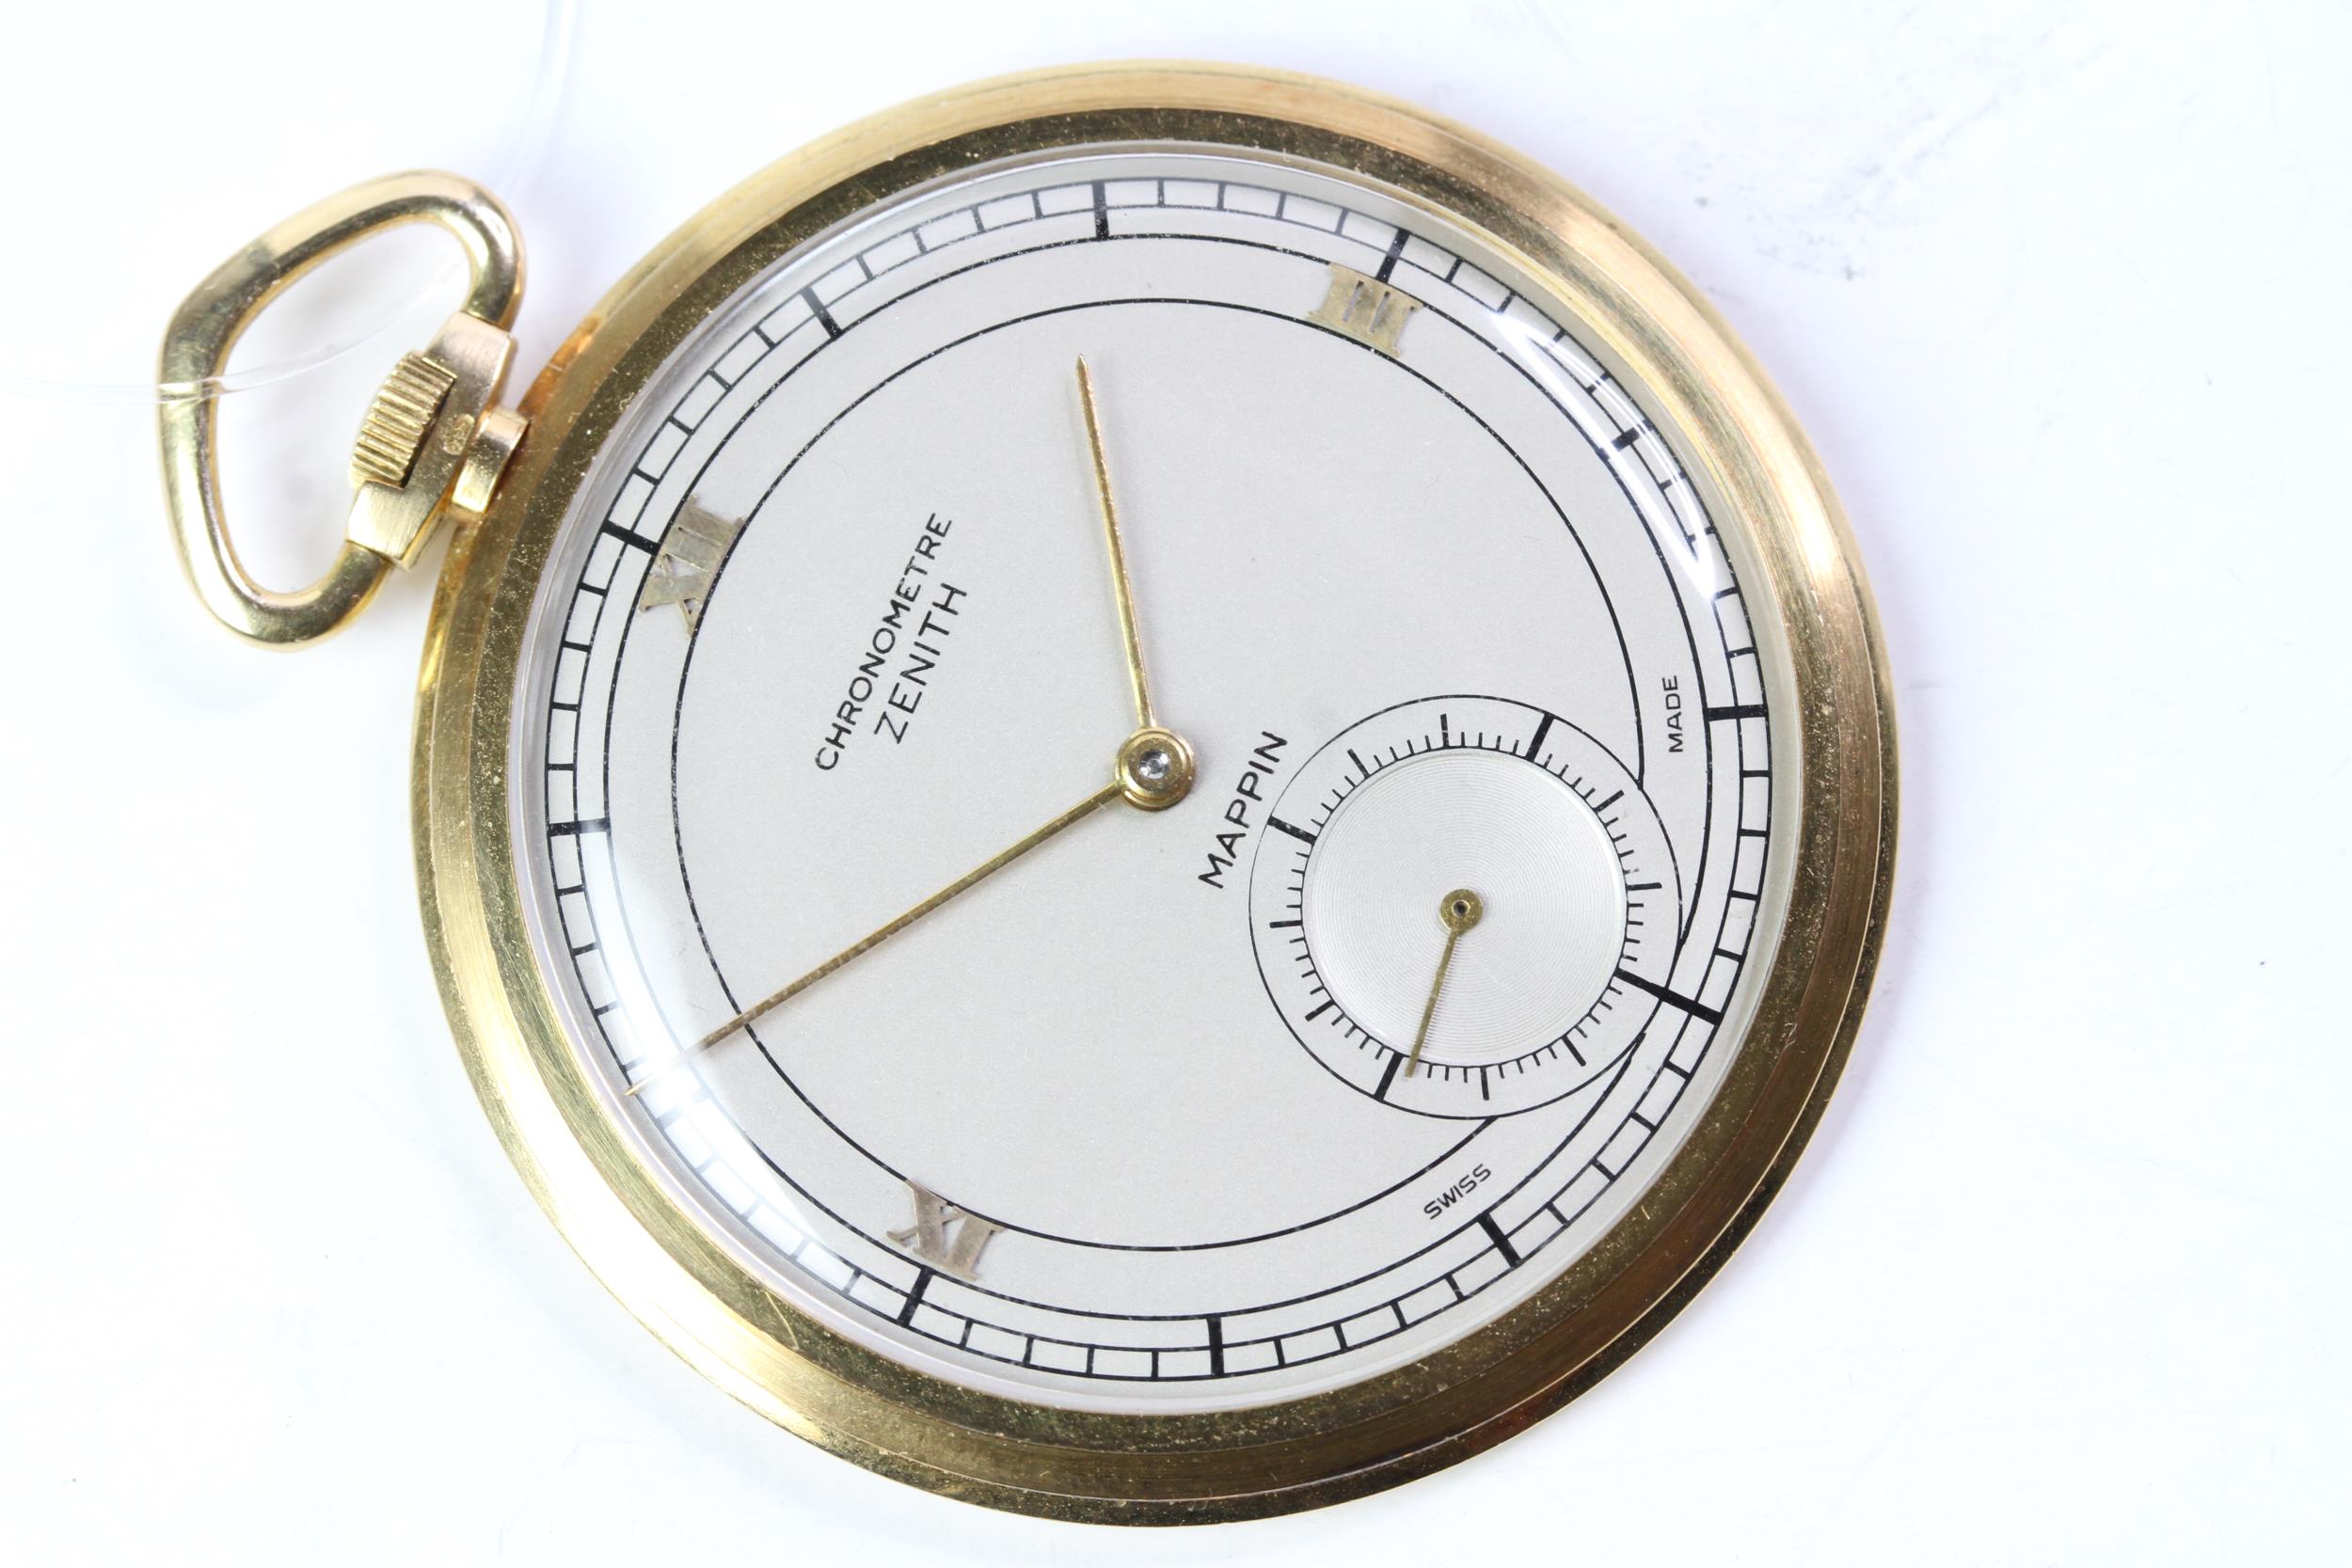 FINE AND RARE 18CT ZENITH MAPPIN DIAL CHRONOMETRE RASOR THIN POCKET WATCH, silvered dial, gold Roman - Image 7 of 7